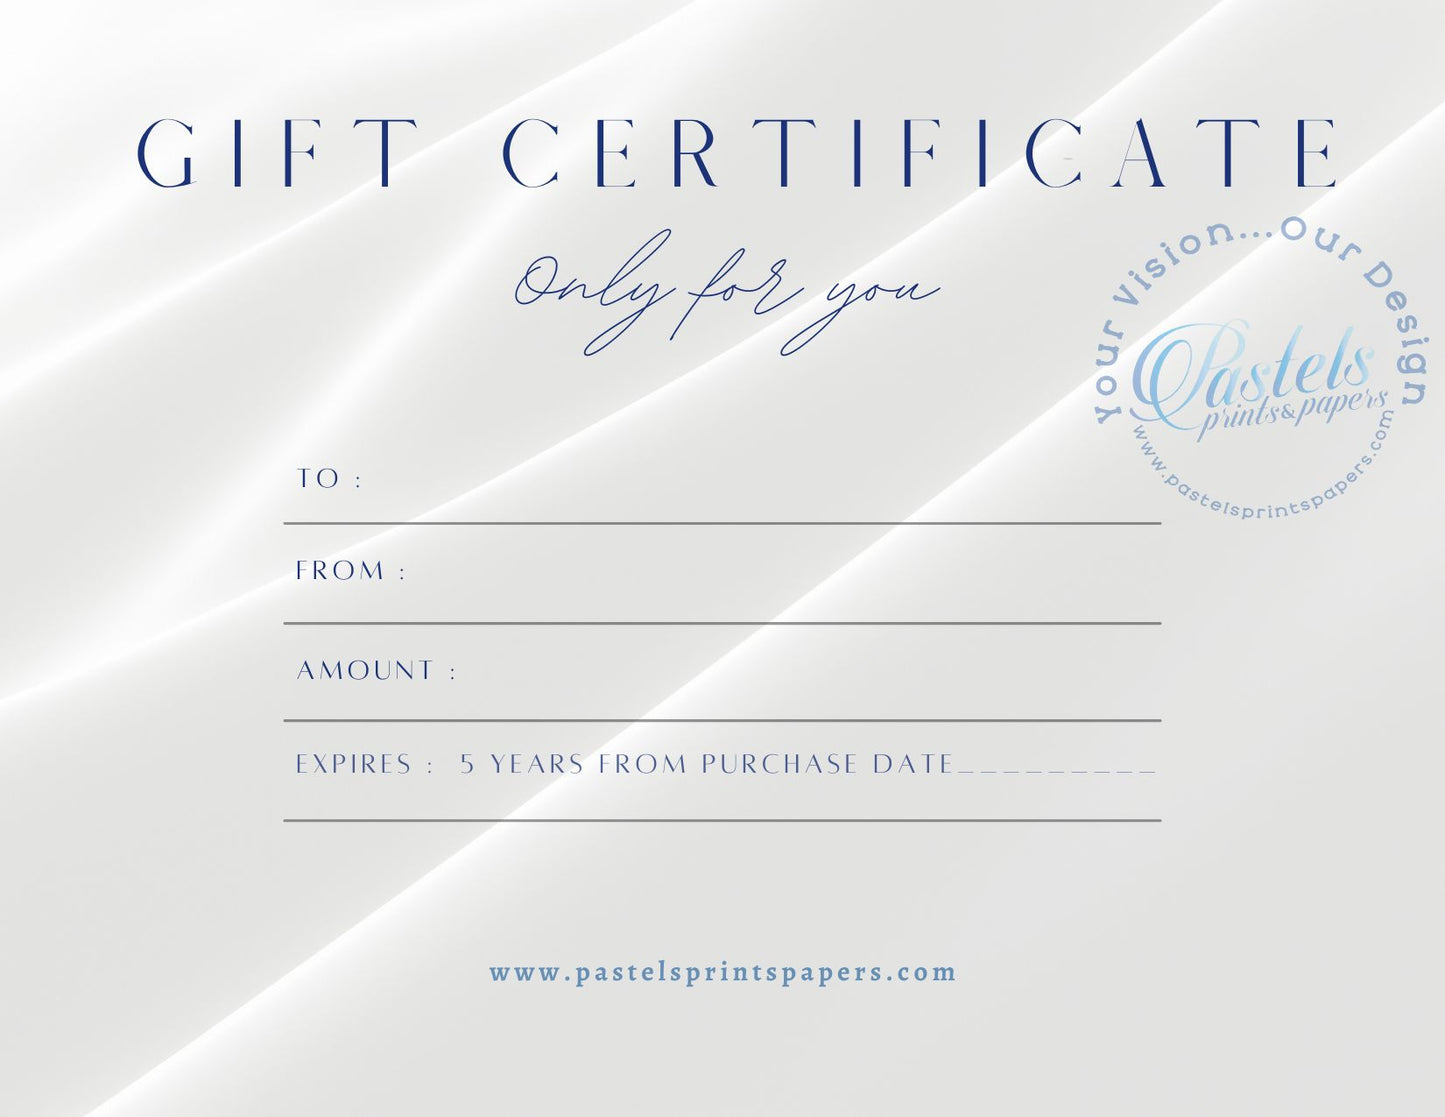 Gifts & Accessories - Gift Certificate